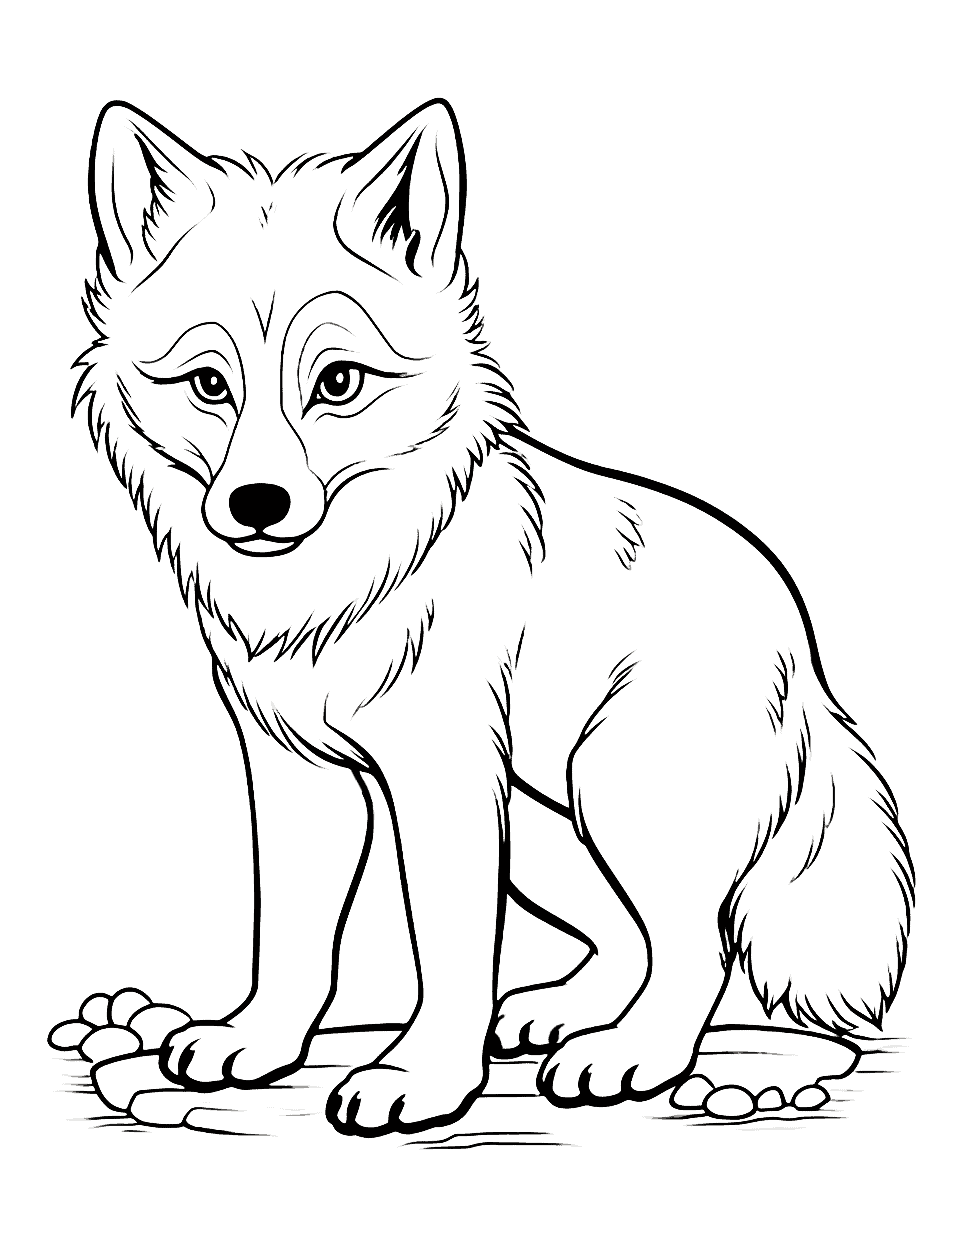 Baby Wolf Sitting Coloring Page - A small baby wolf curiously sitting.